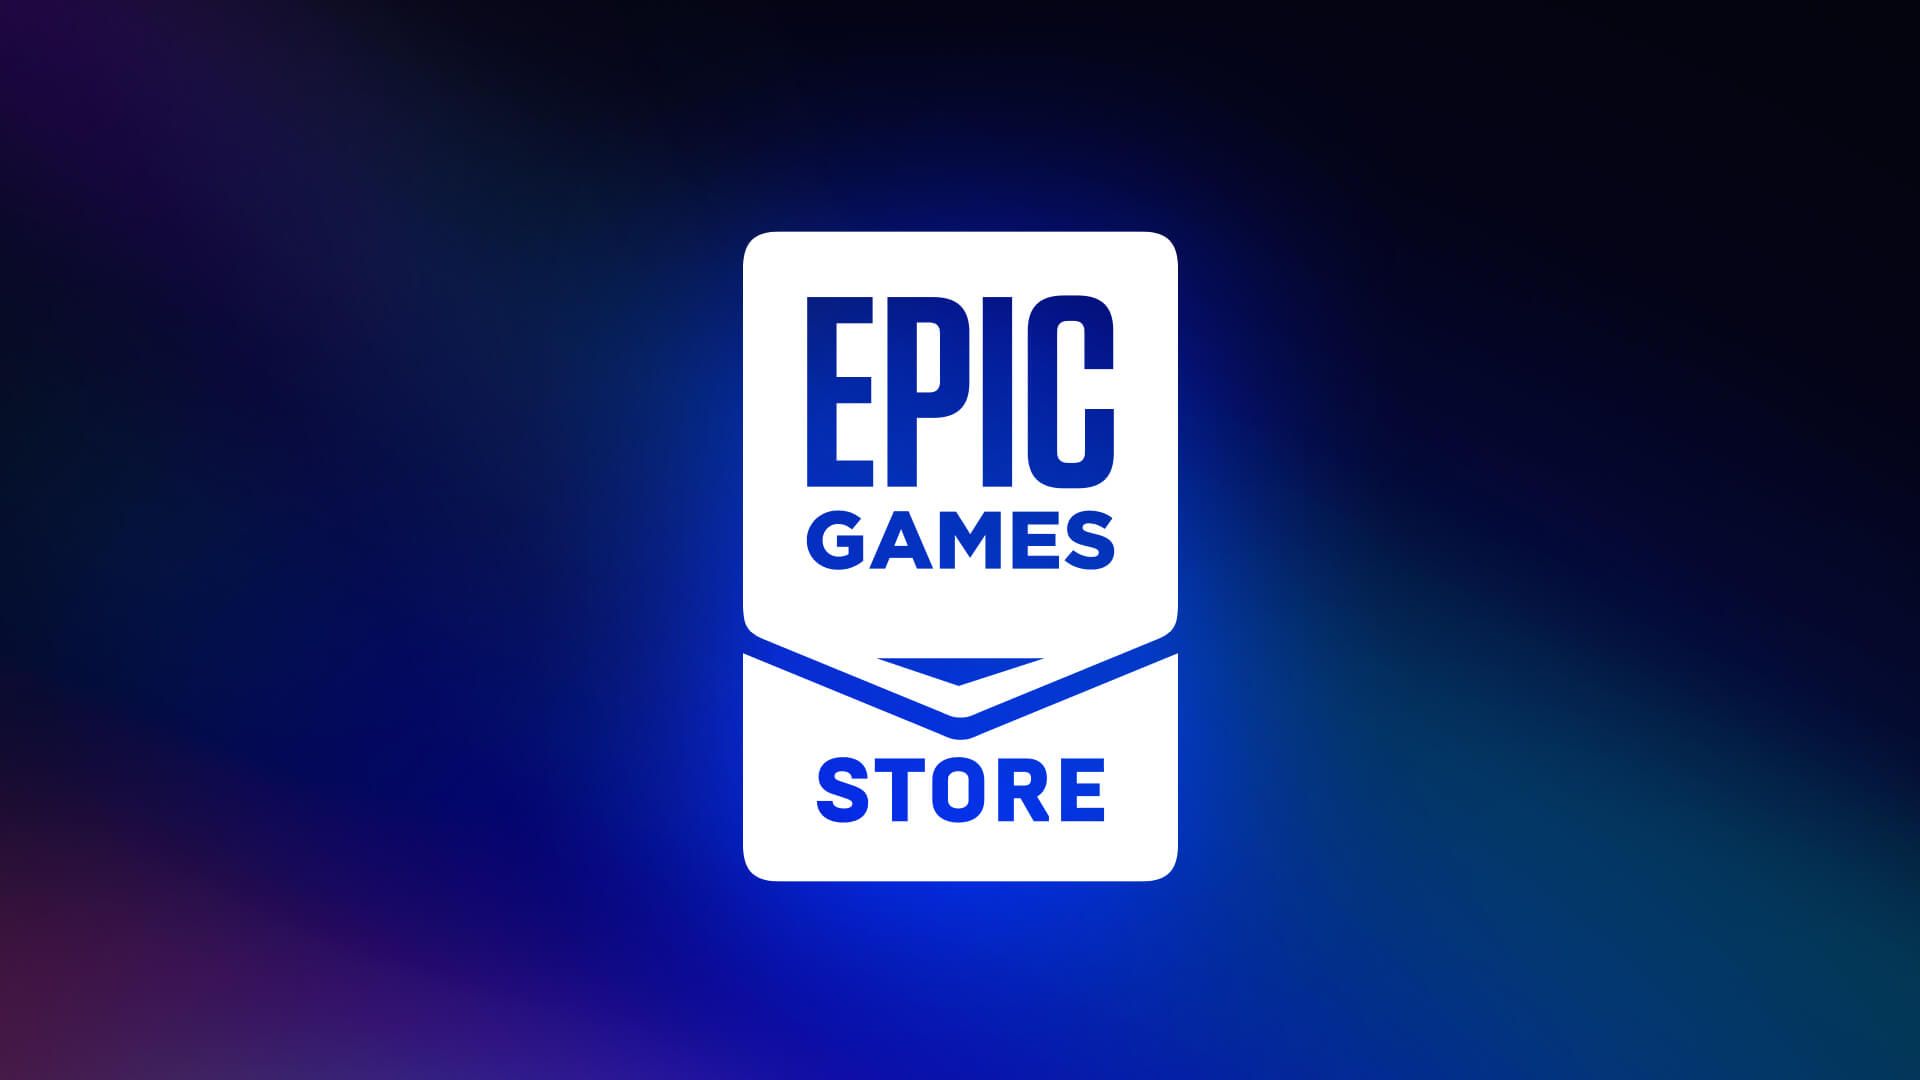 In this article, we will be going over the list of Epic Games Store free games that will be made available through 2022 on the platform for gamers to enjoy.